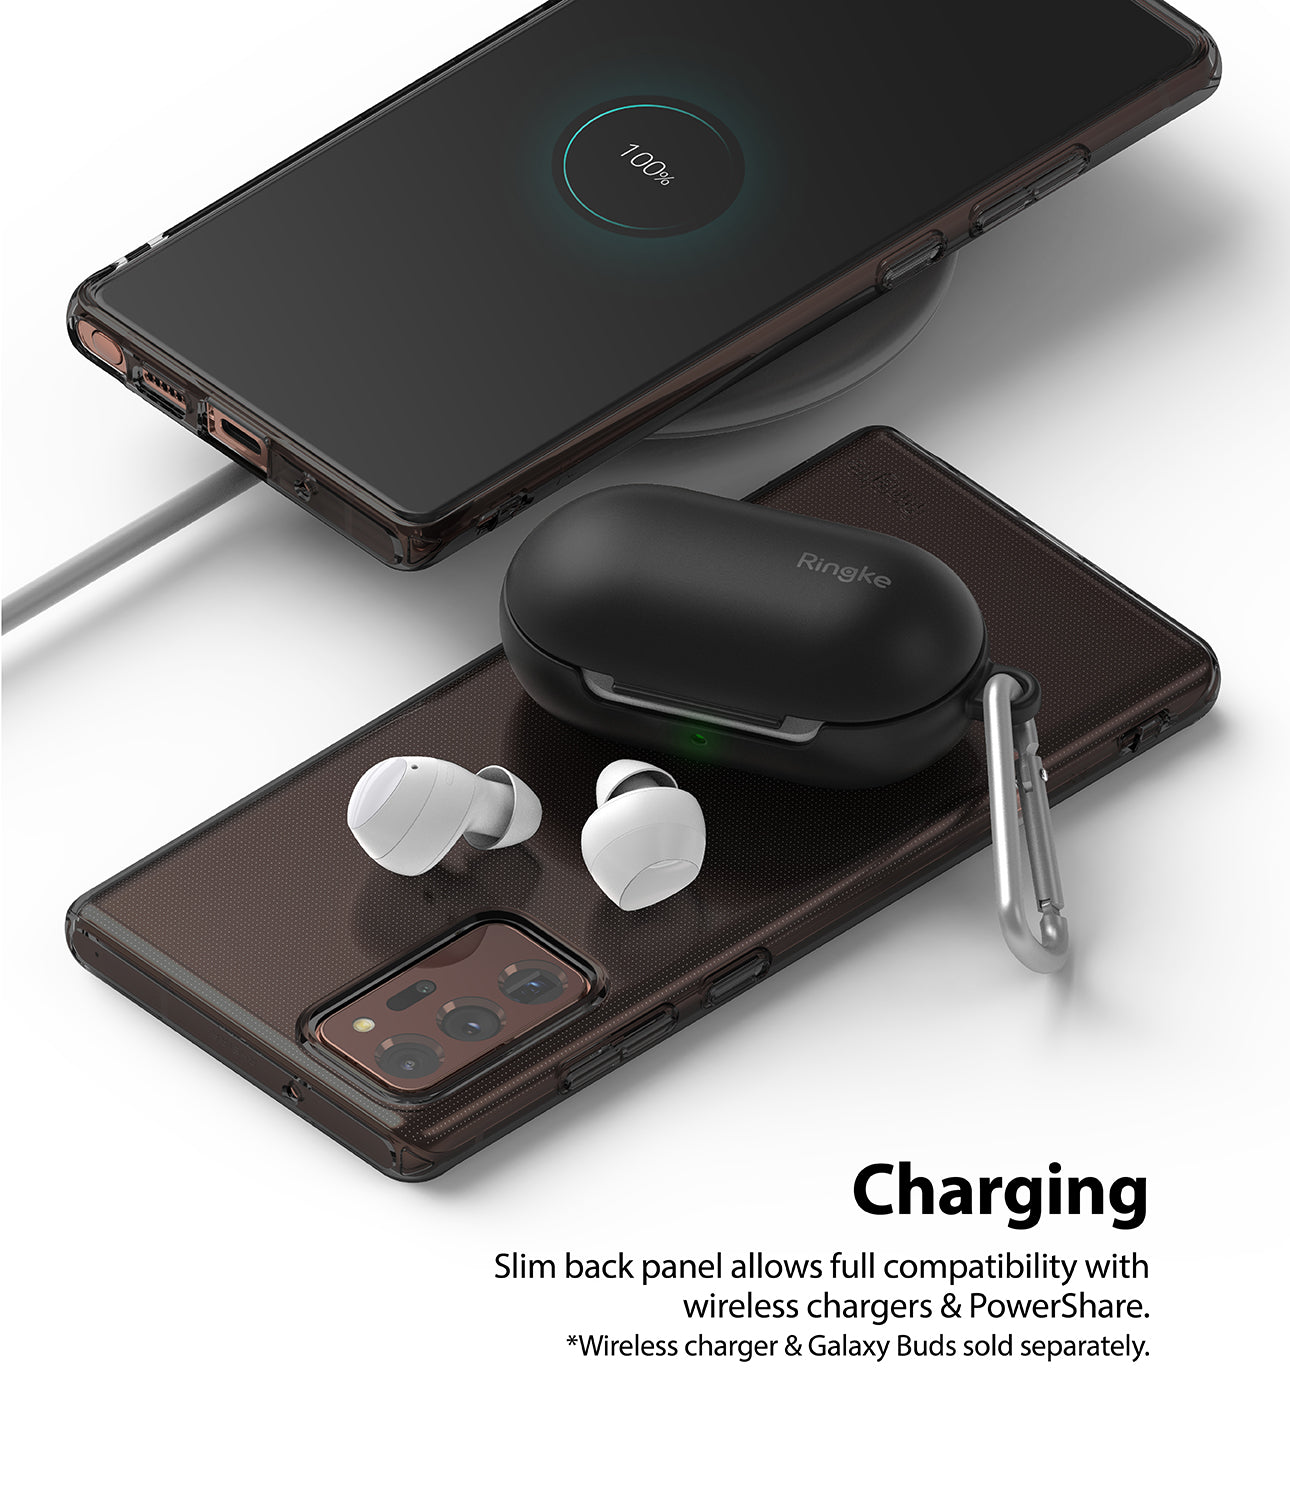 slim back panel allows full compatibility with wireless chargers & powershare